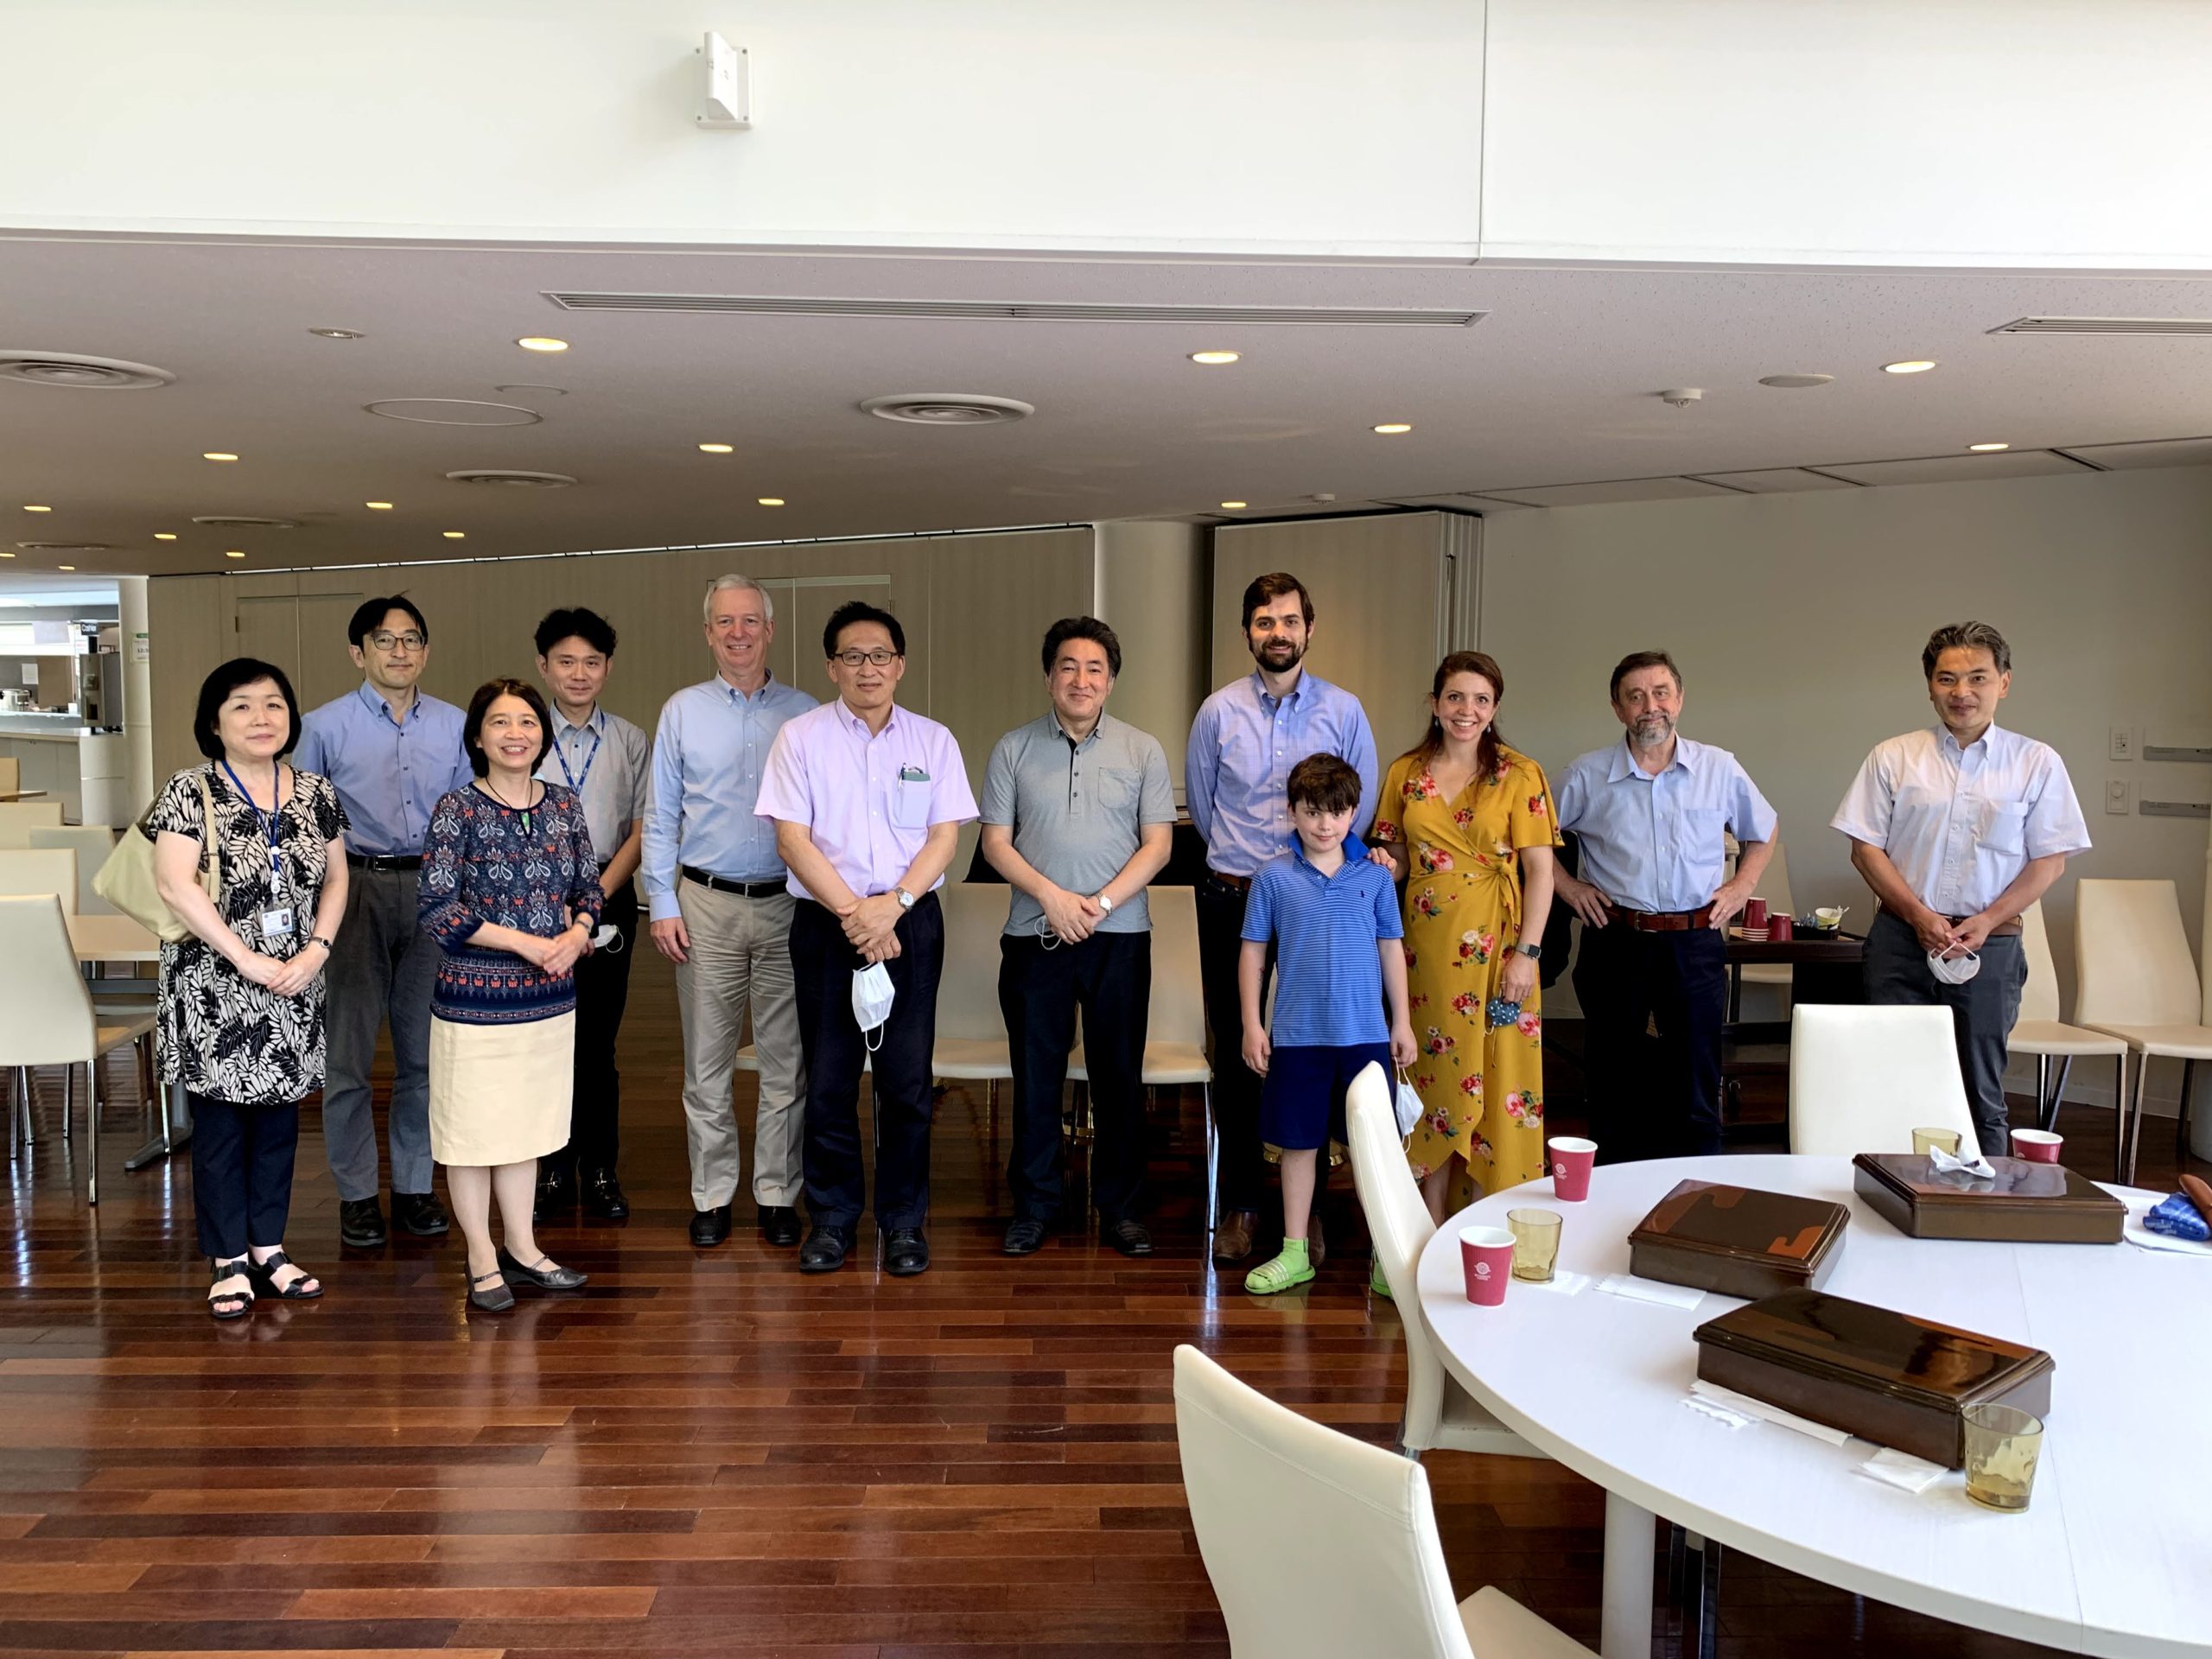 Paul and his family at a farewell lunch hosted by ICU President Shoichiro Iwakiri and colleagues in June 2020.